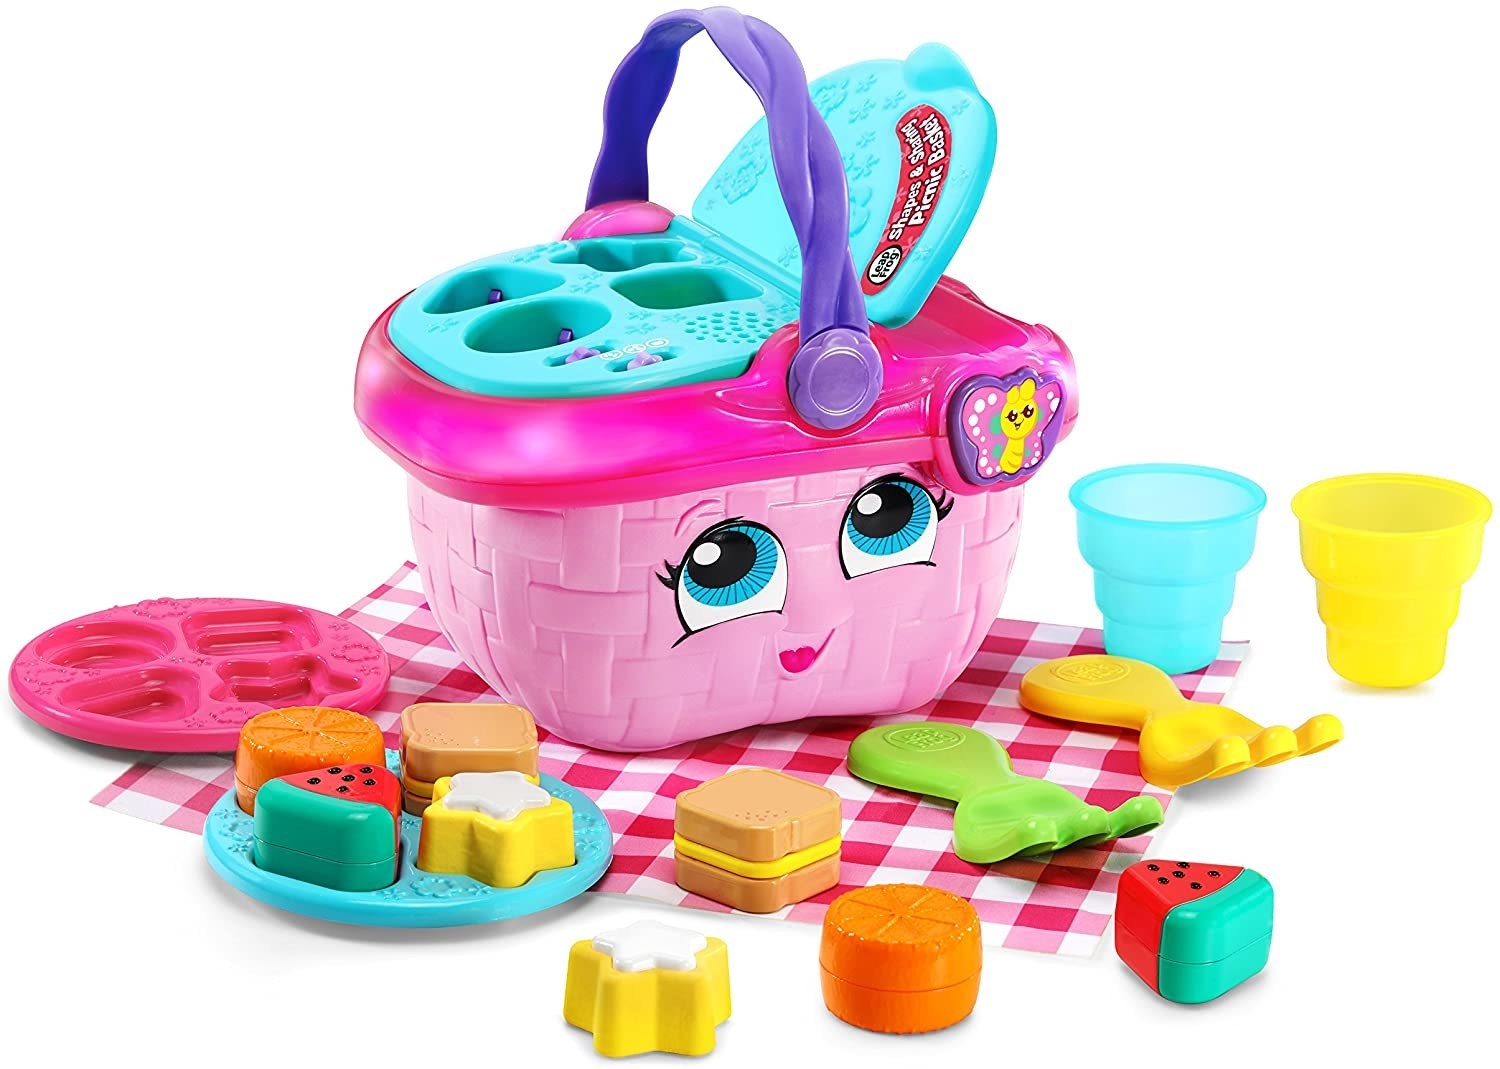 The pink picnic basket with a shape sorter lid and pretend food and utensils